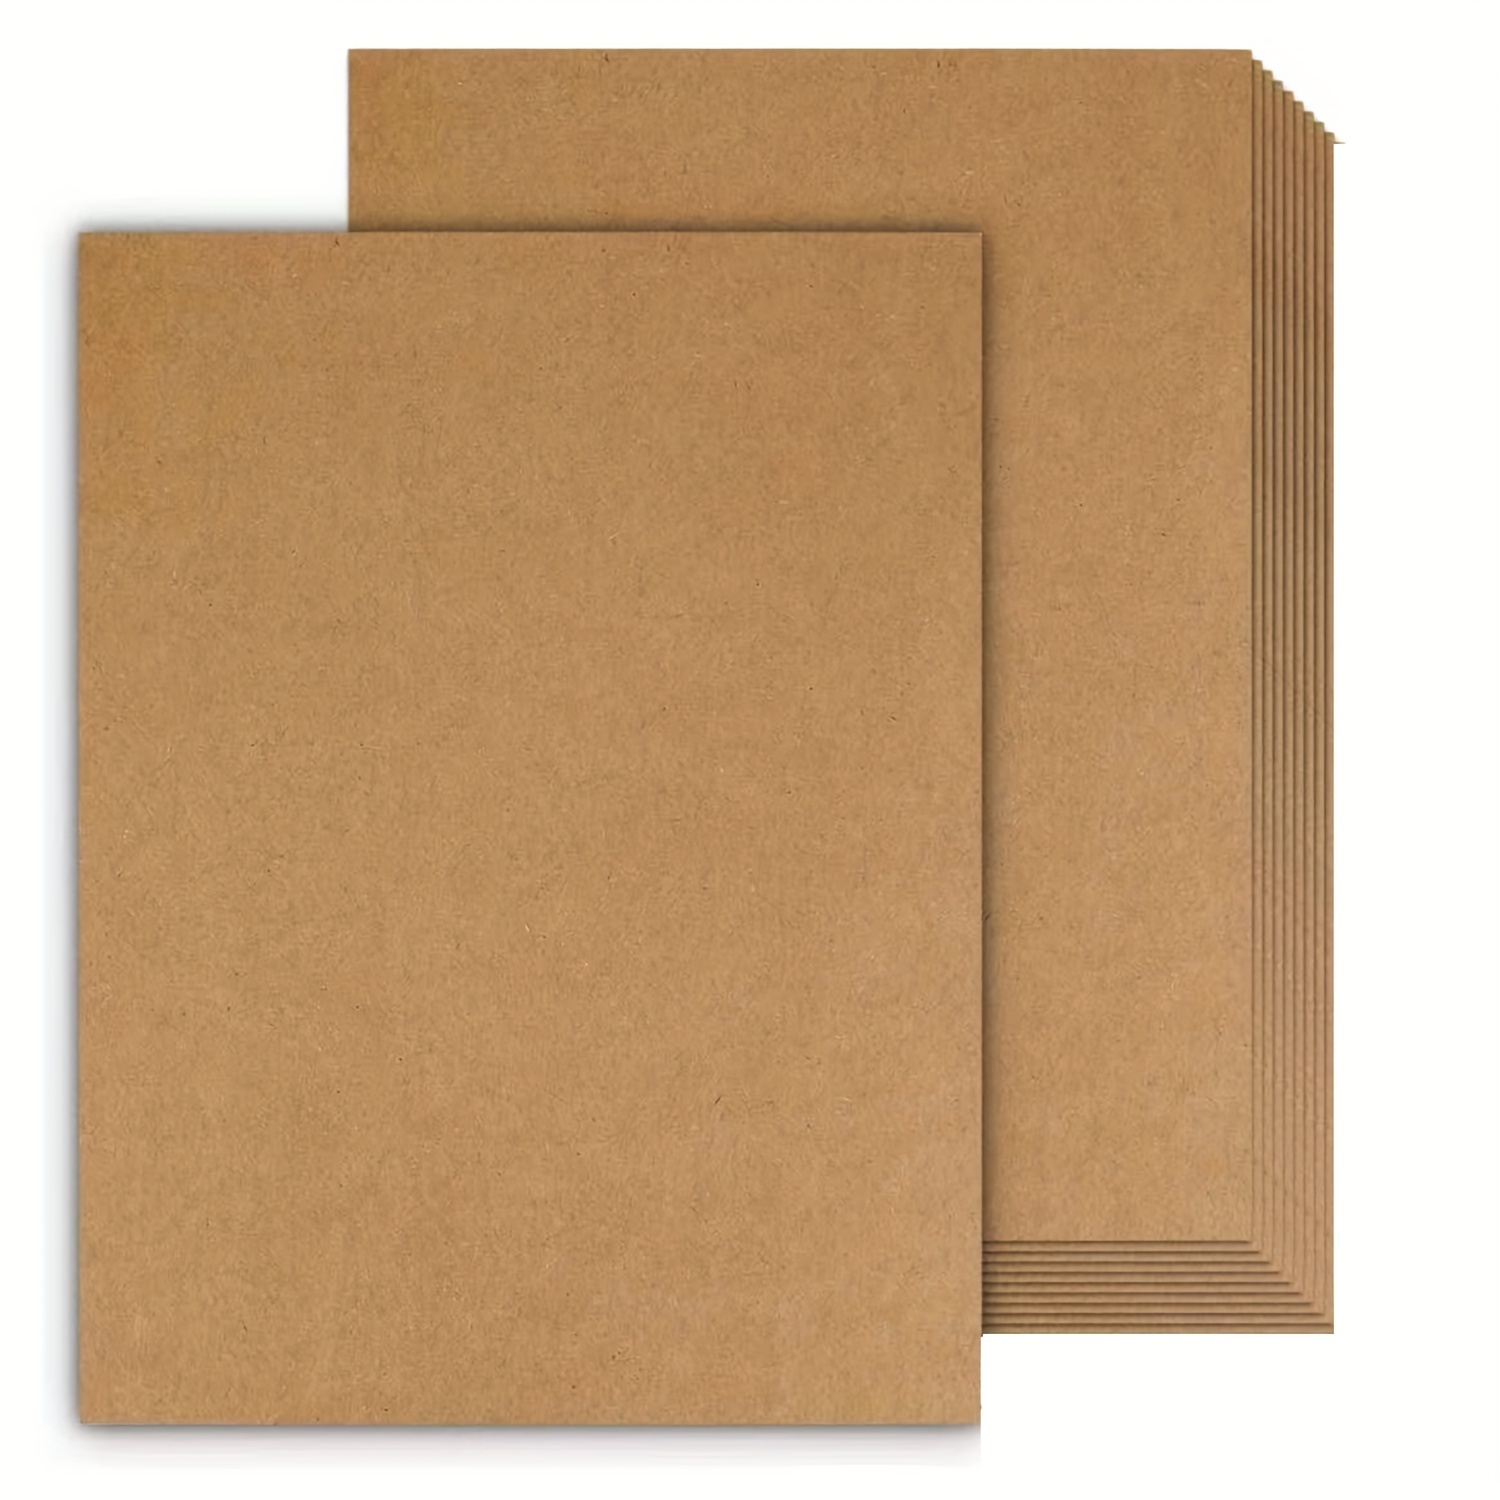 20 Sheets Colored Thick Paper Cardstock Blank for India